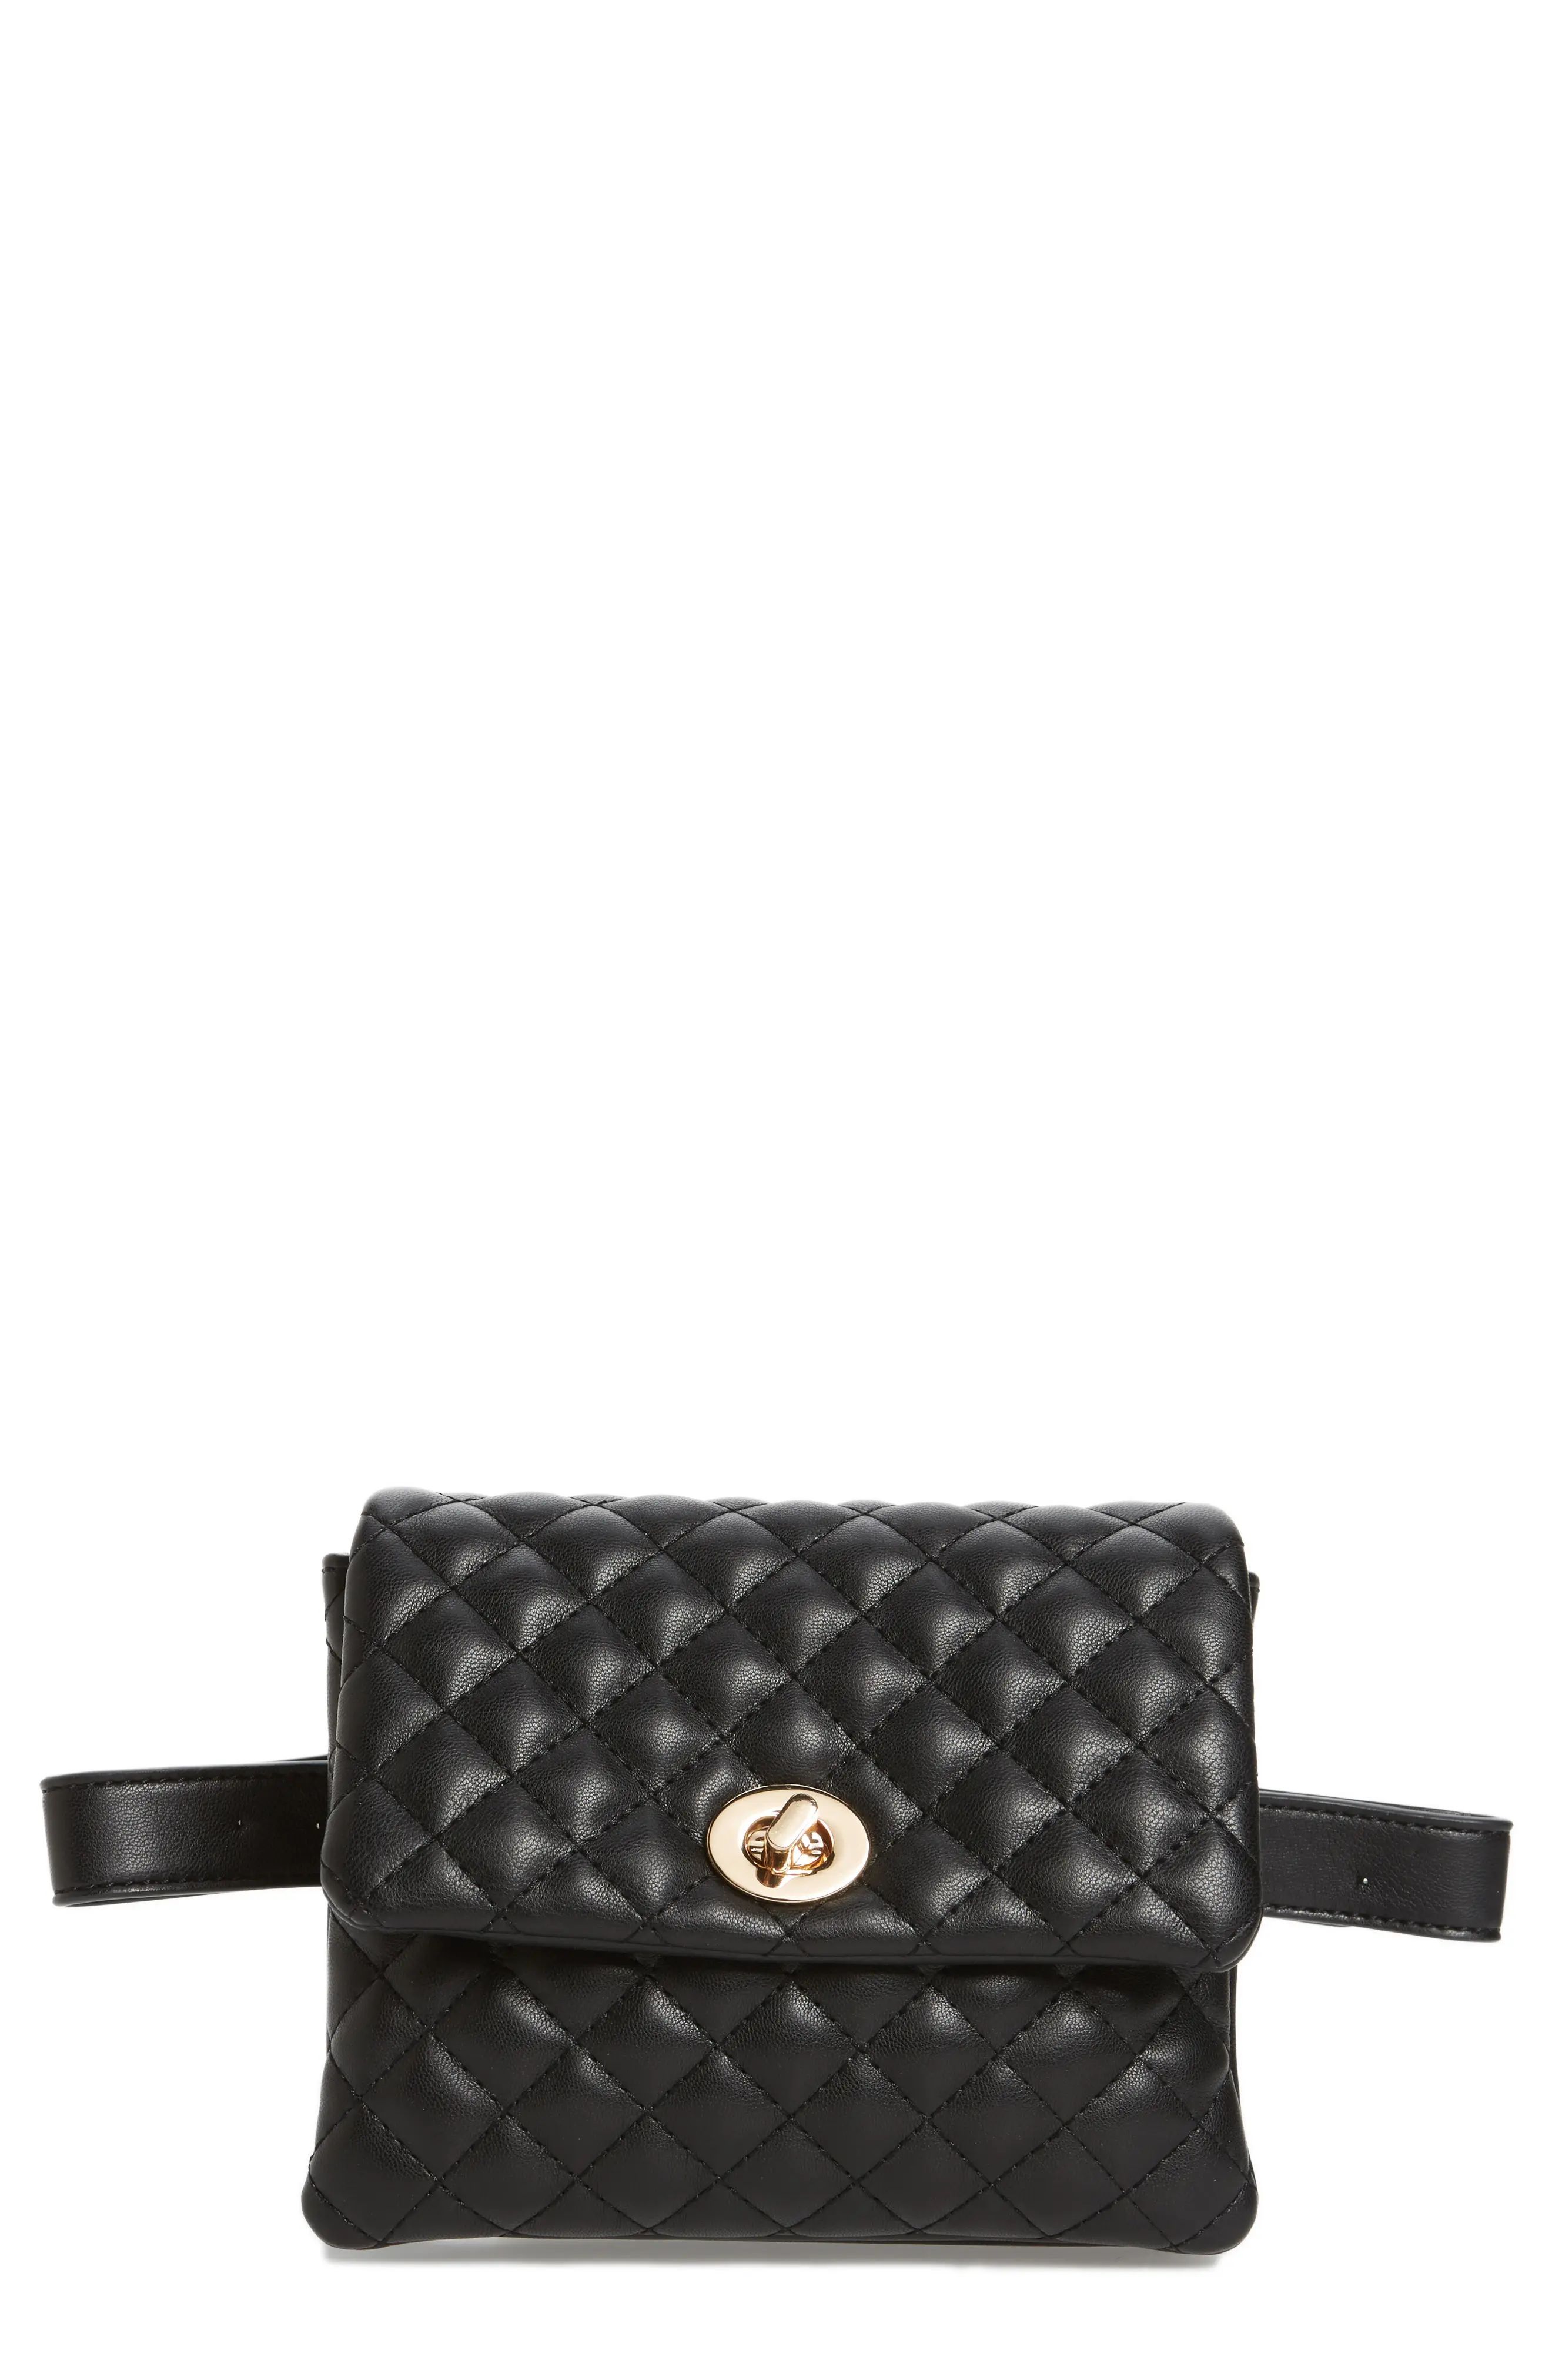 Mali + Lili Quilted Faux Leather Convertible Belt Bag | Nordstrom